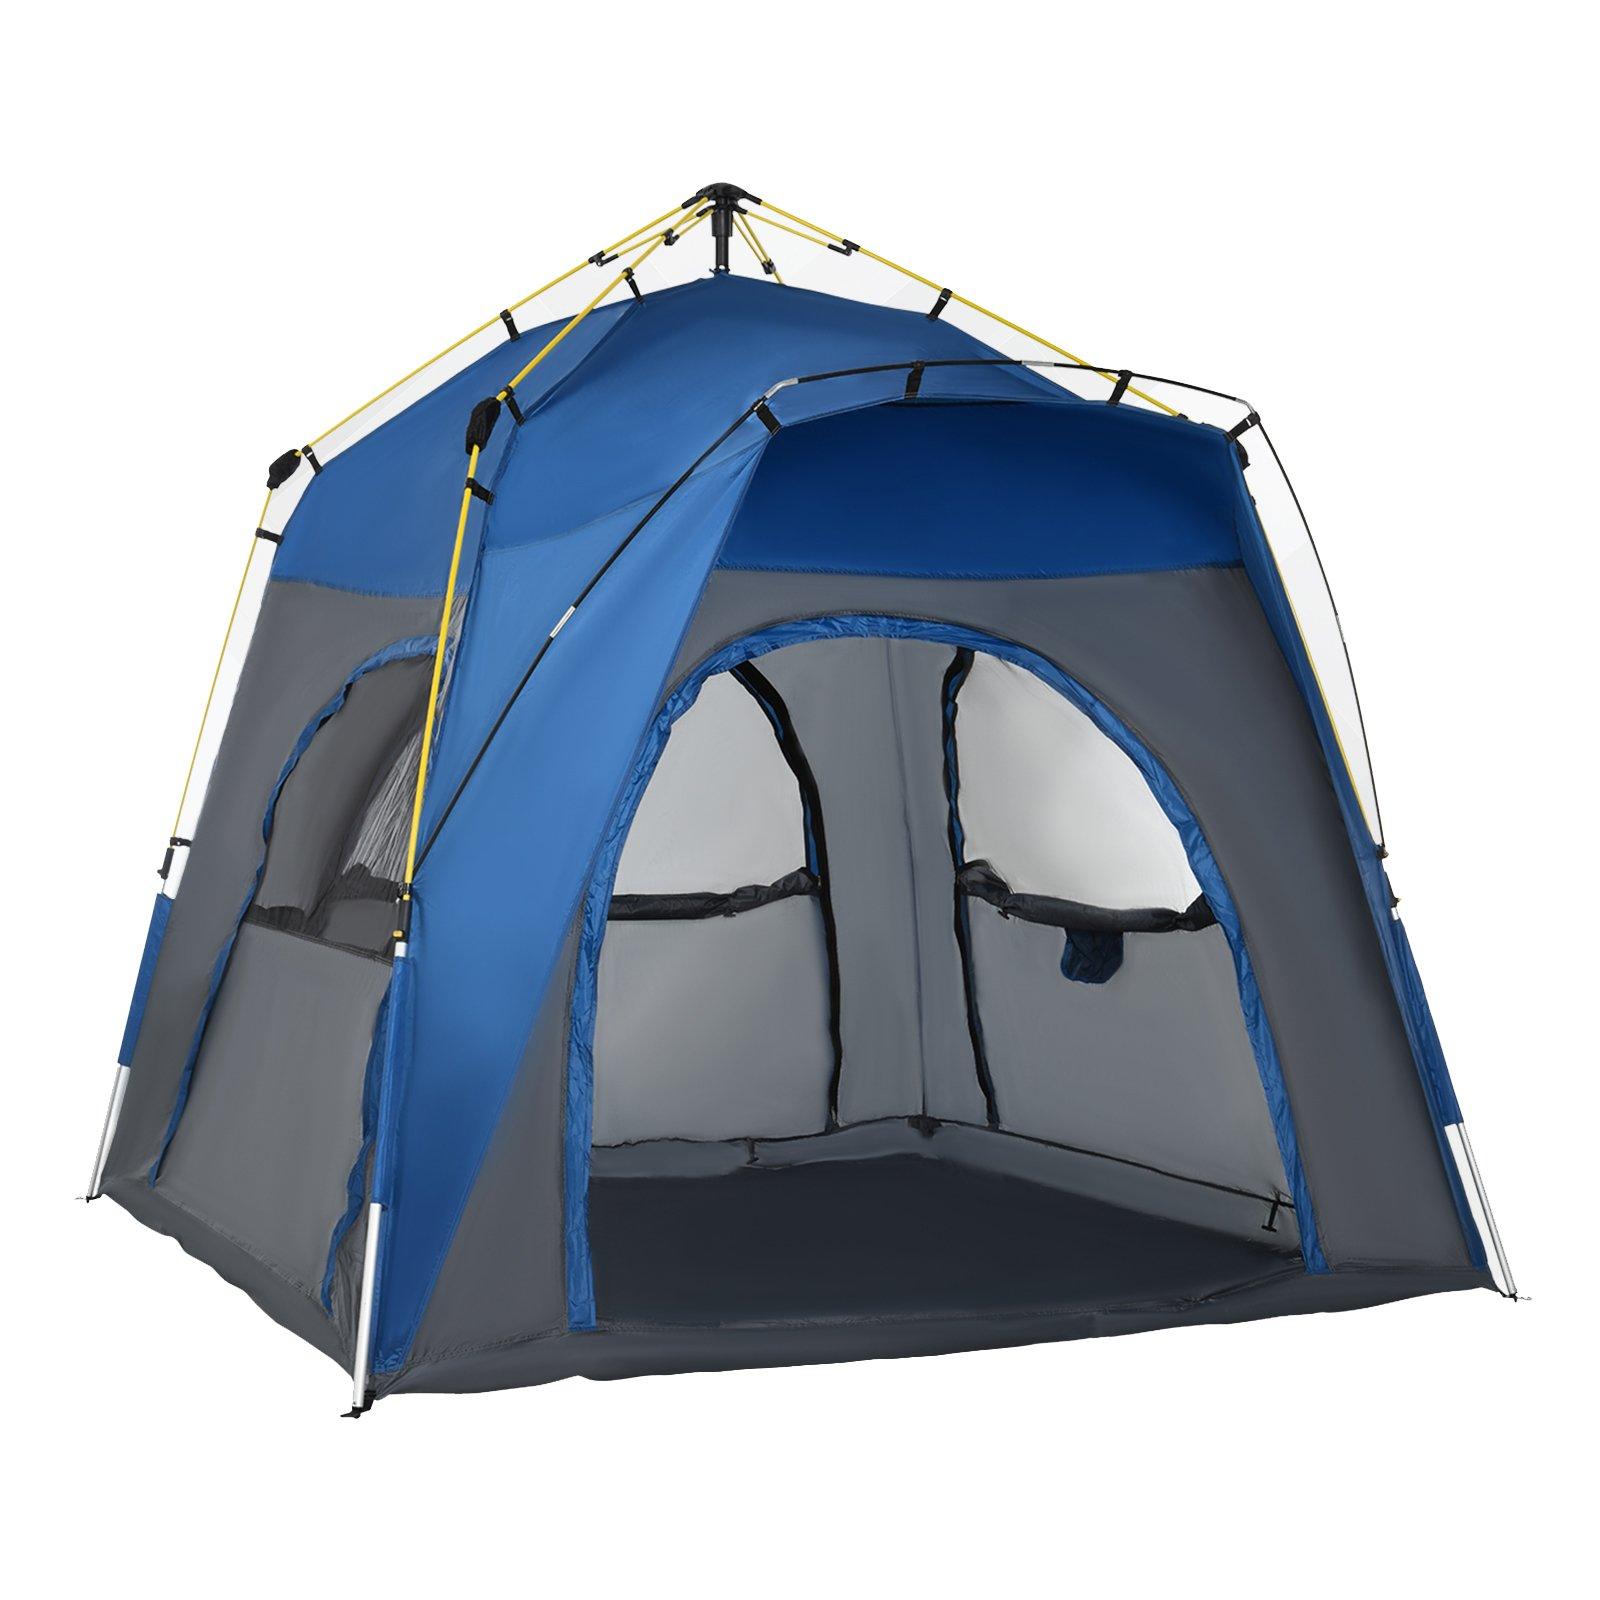 Four Man Pop Up Tent Automatic Camping Backpacking Dome Shelter